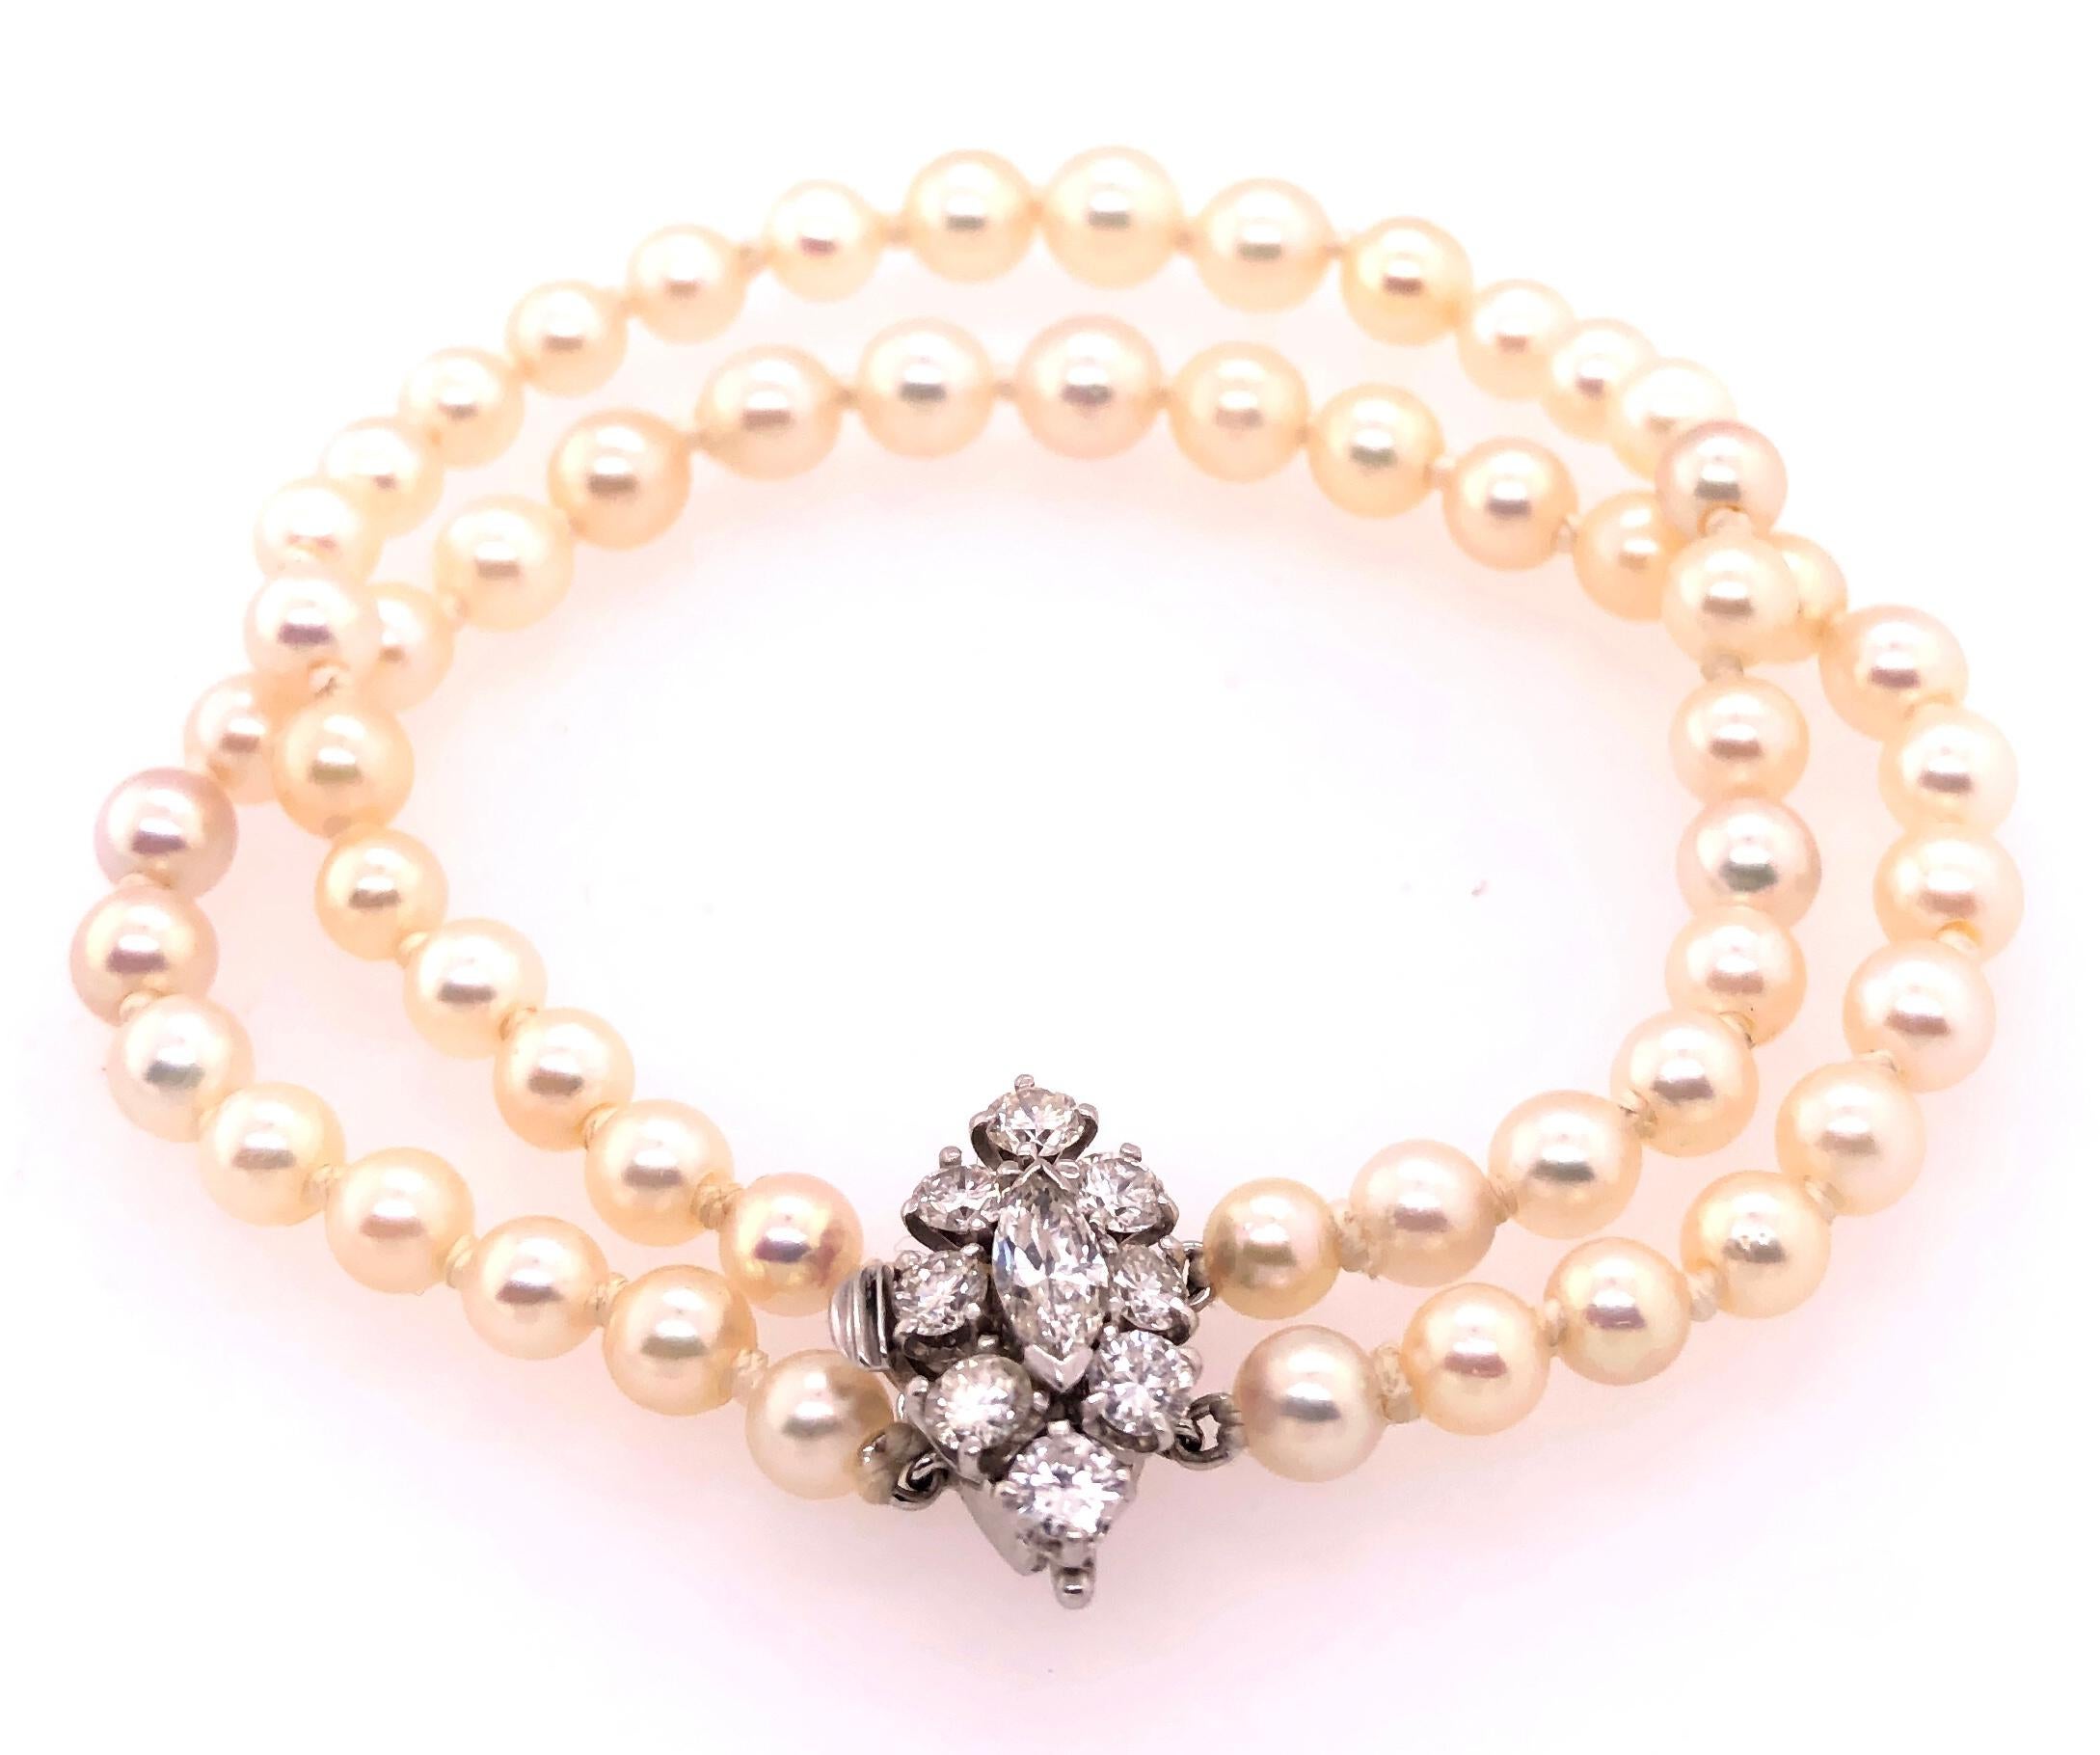 Double Strand Cultured Pearl & Diamond Bracelet. Large Diamond Clasp 1.20 T.D.W. 18 Karat White Gold 7 Inch Bracelet with Diamond Marquise Pendant. Hallmark OR 13.6 grams total weight. 5mm pearl size. .40 carat marquise pendant Flanked by eight .10